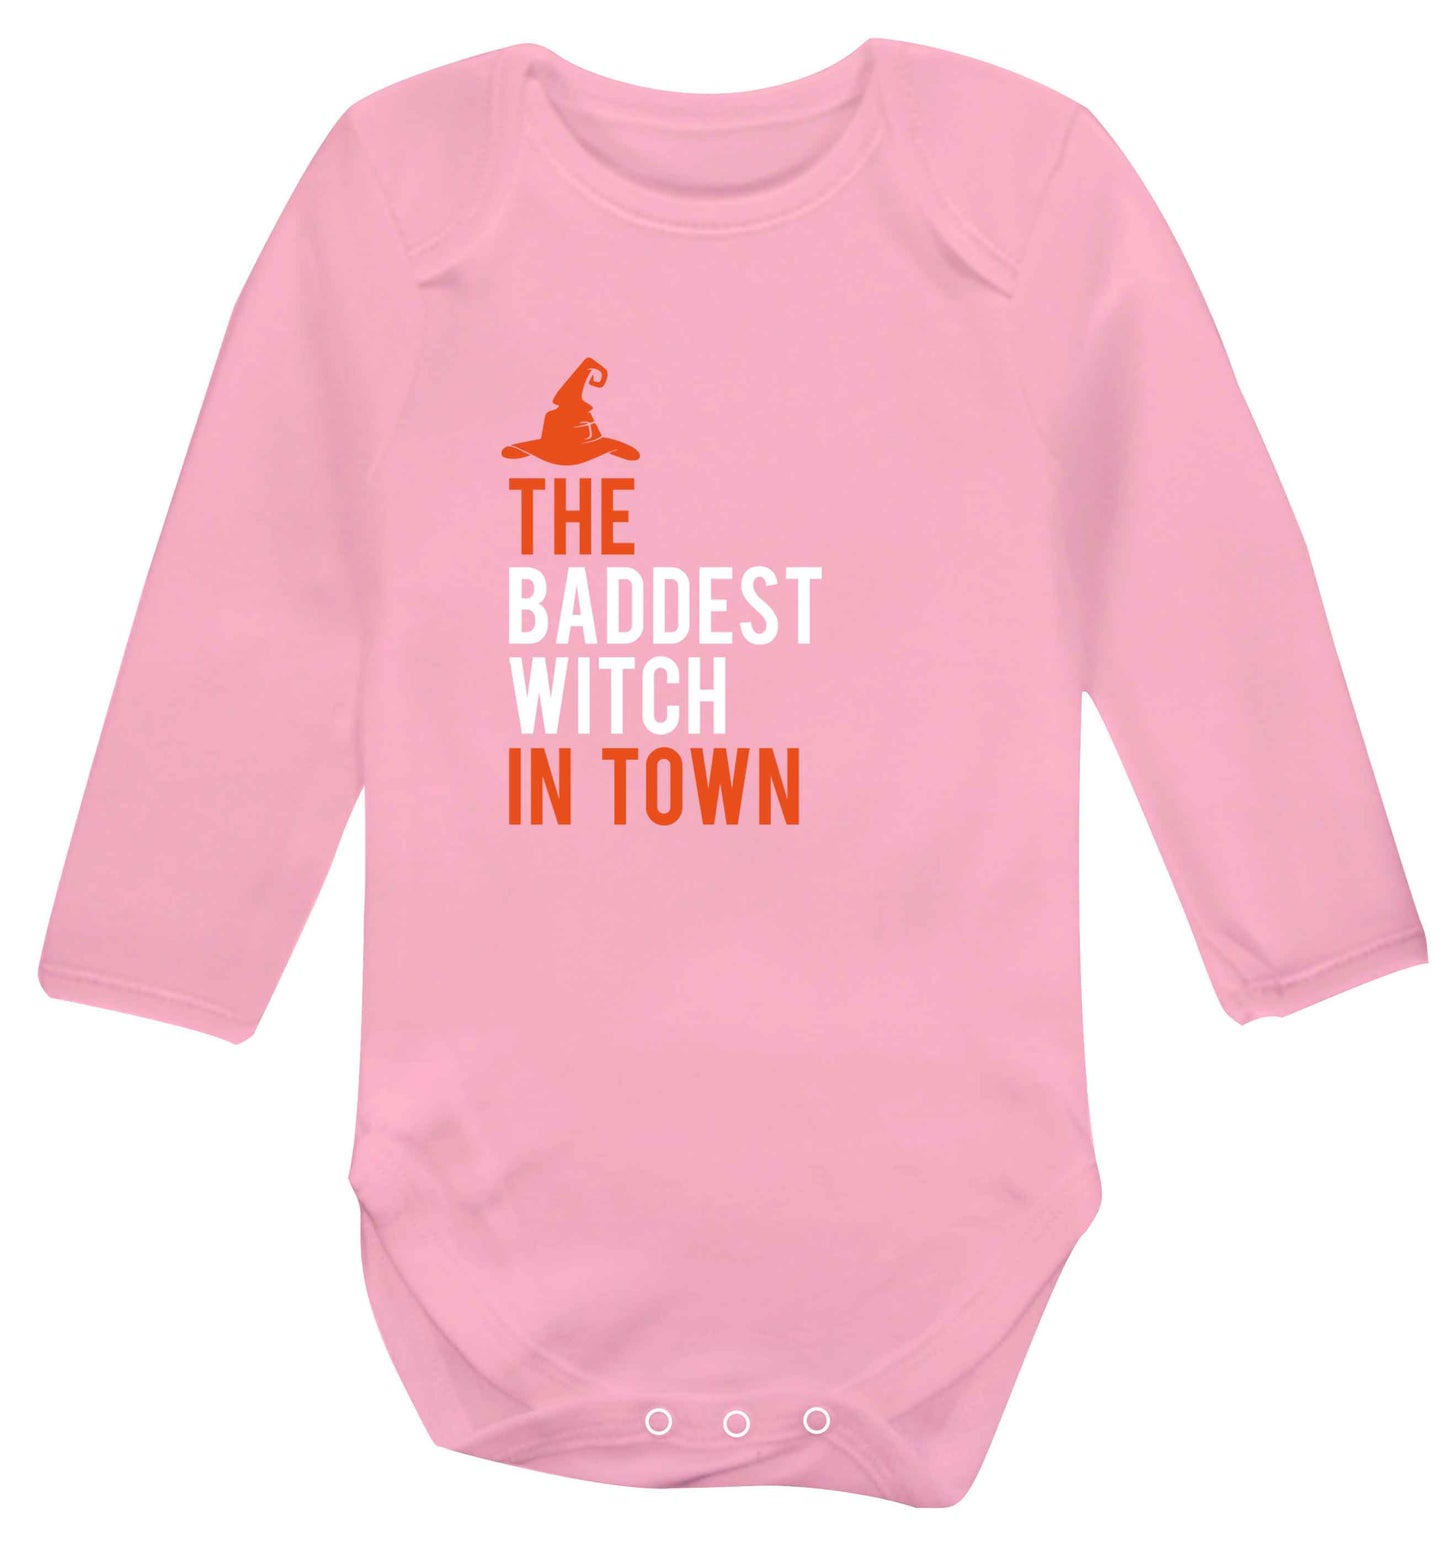 Badest witch in town baby vest long sleeved pale pink 6-12 months